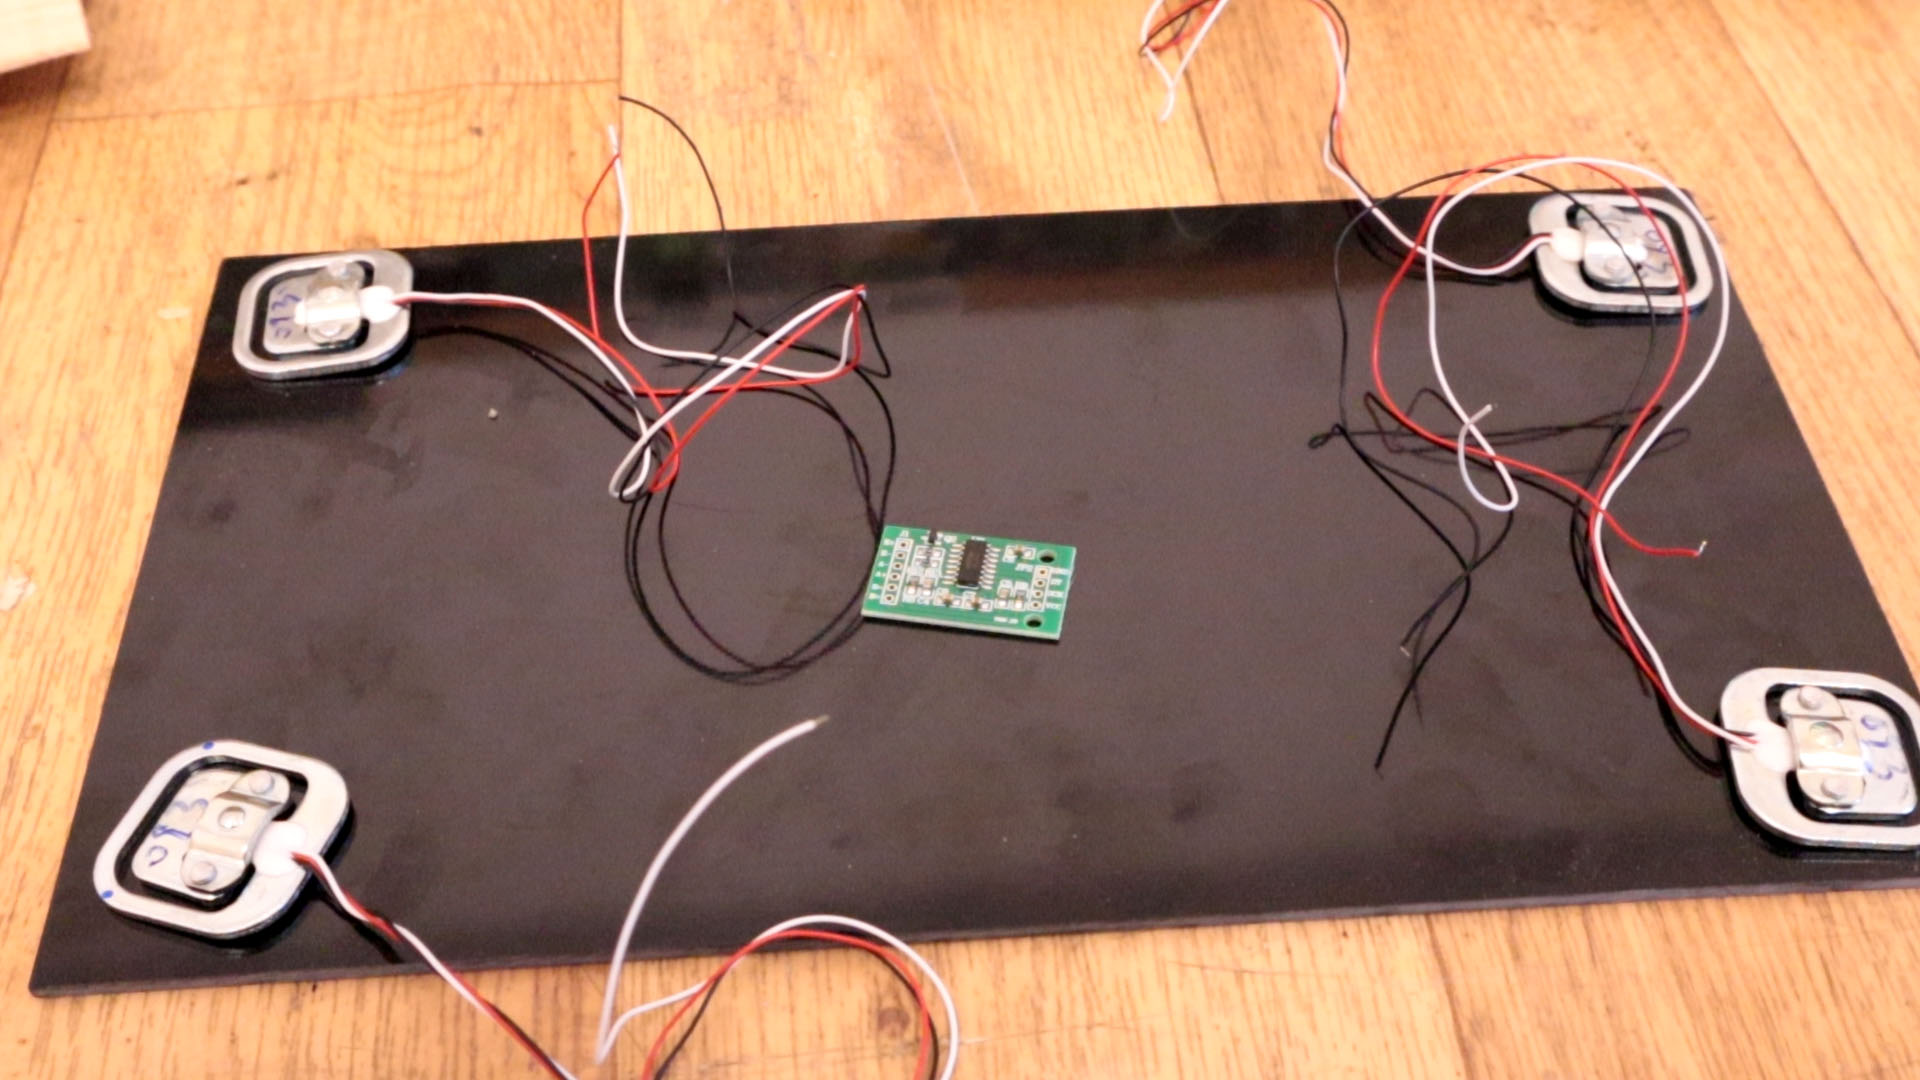 Arduino body weight scale 4 load cells tutorial